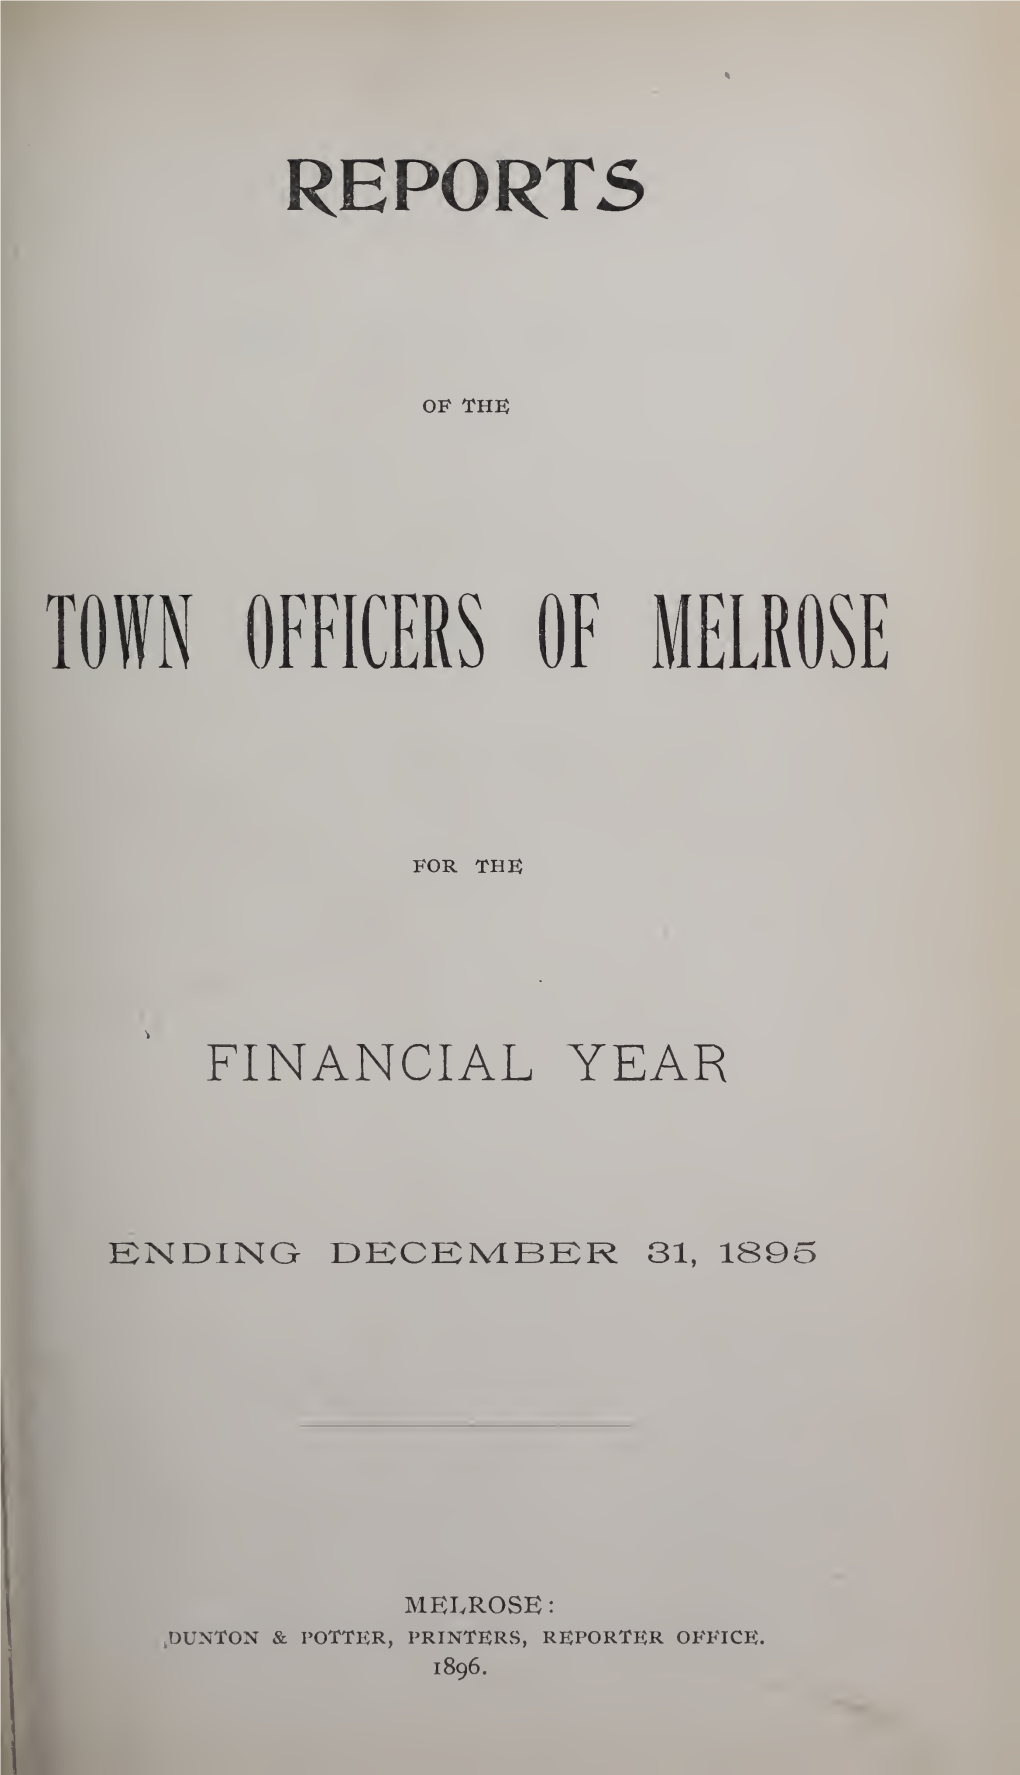 City of Melrose Annual Report